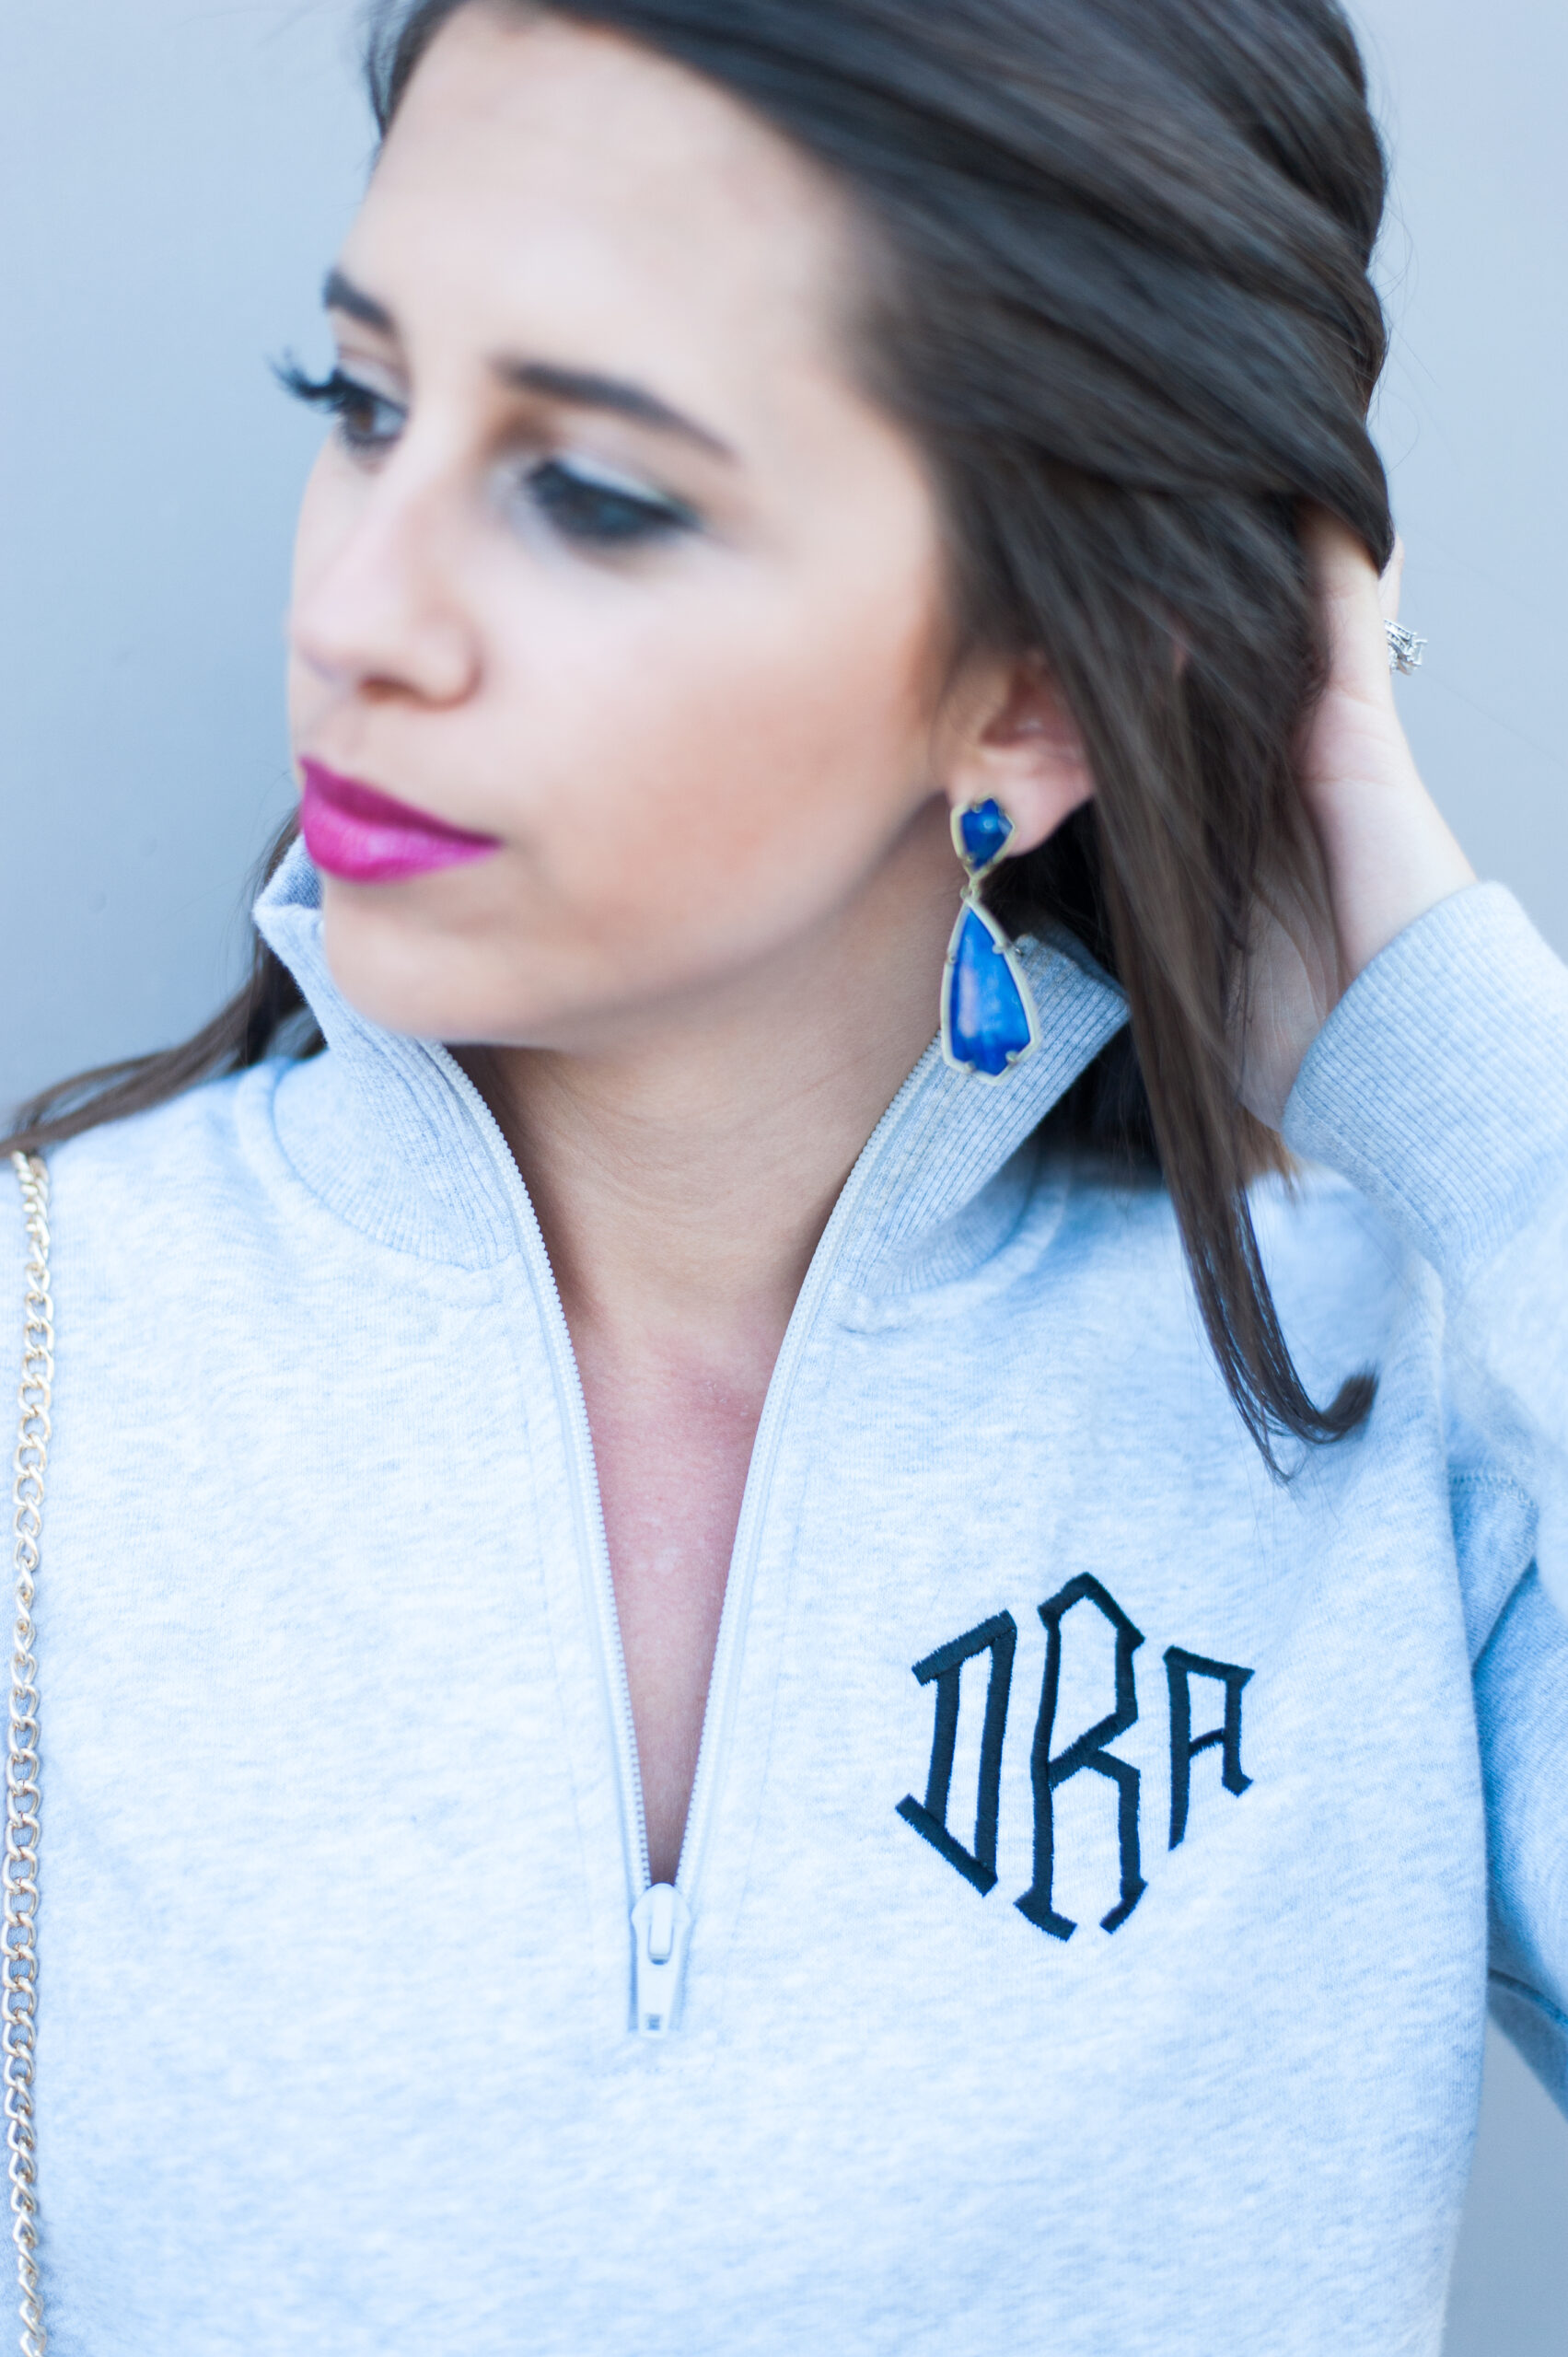 Dress Up Buttercup // A Houston-based fashion and inspiration blog developed to daily inspire your own personal style by Dede Raad | Marley Lilly